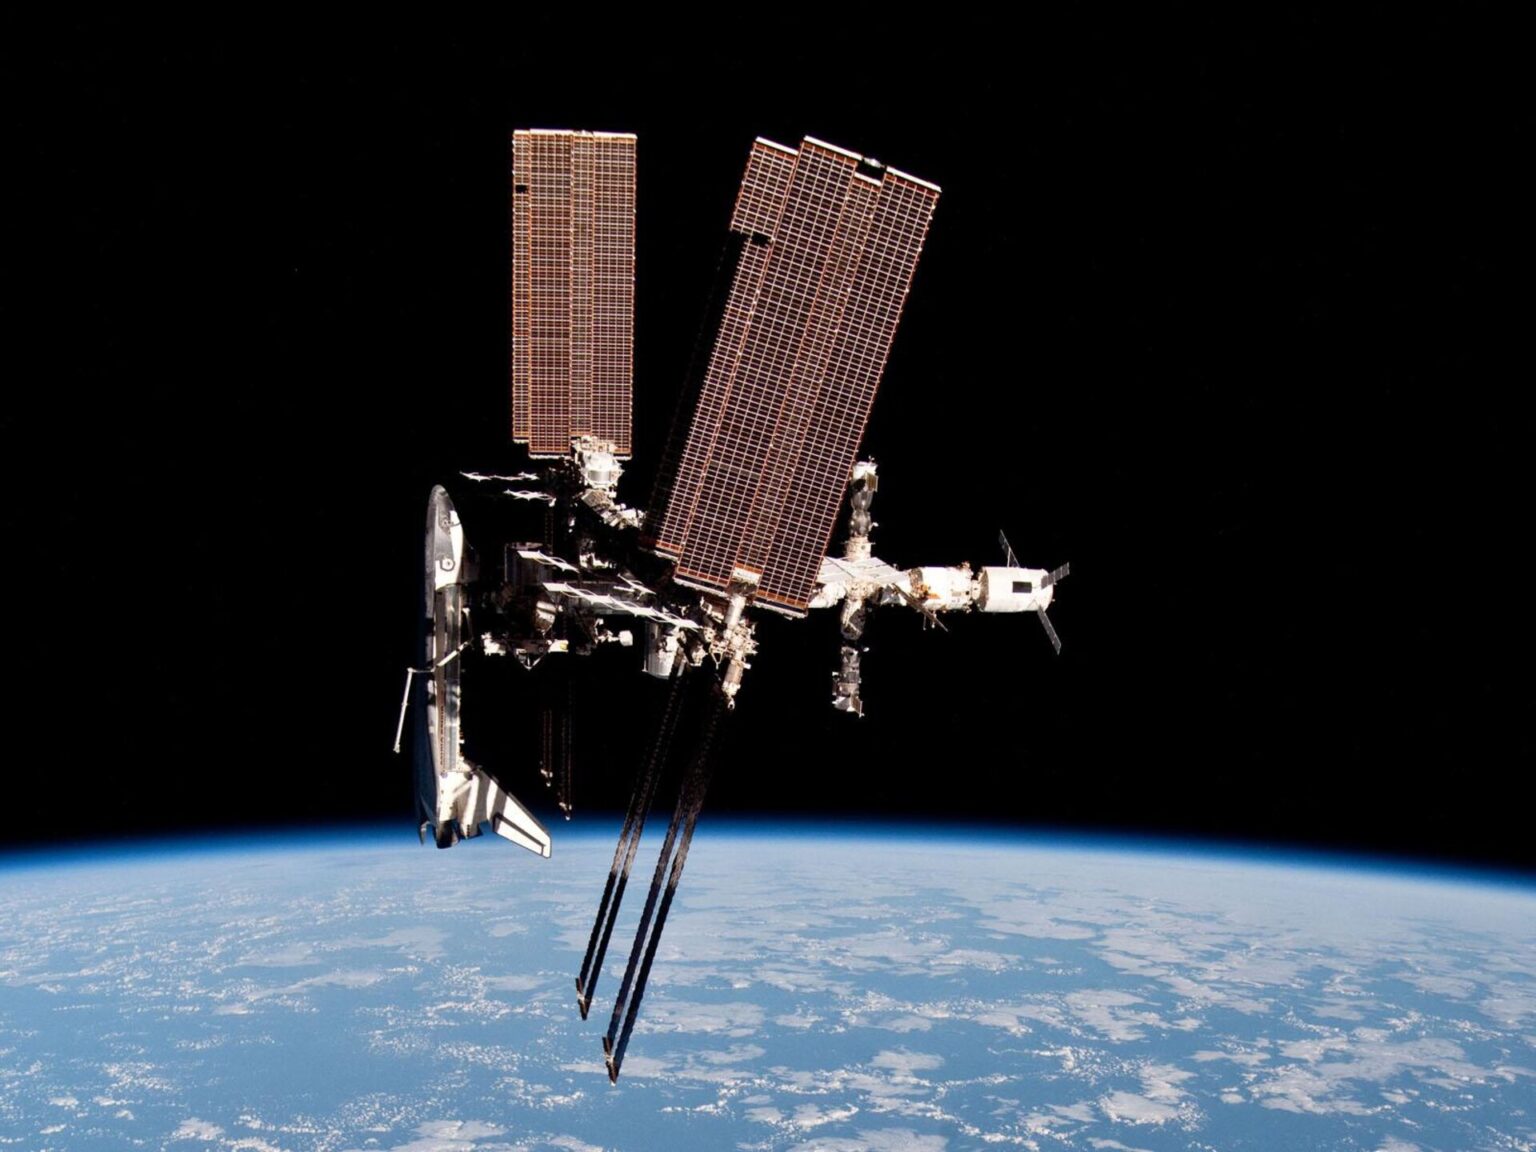 http://universemagazine.com/wp-content/uploads/2023/04/the_international_space_station_with_atv-2_and_endeavour_pillars.jpg